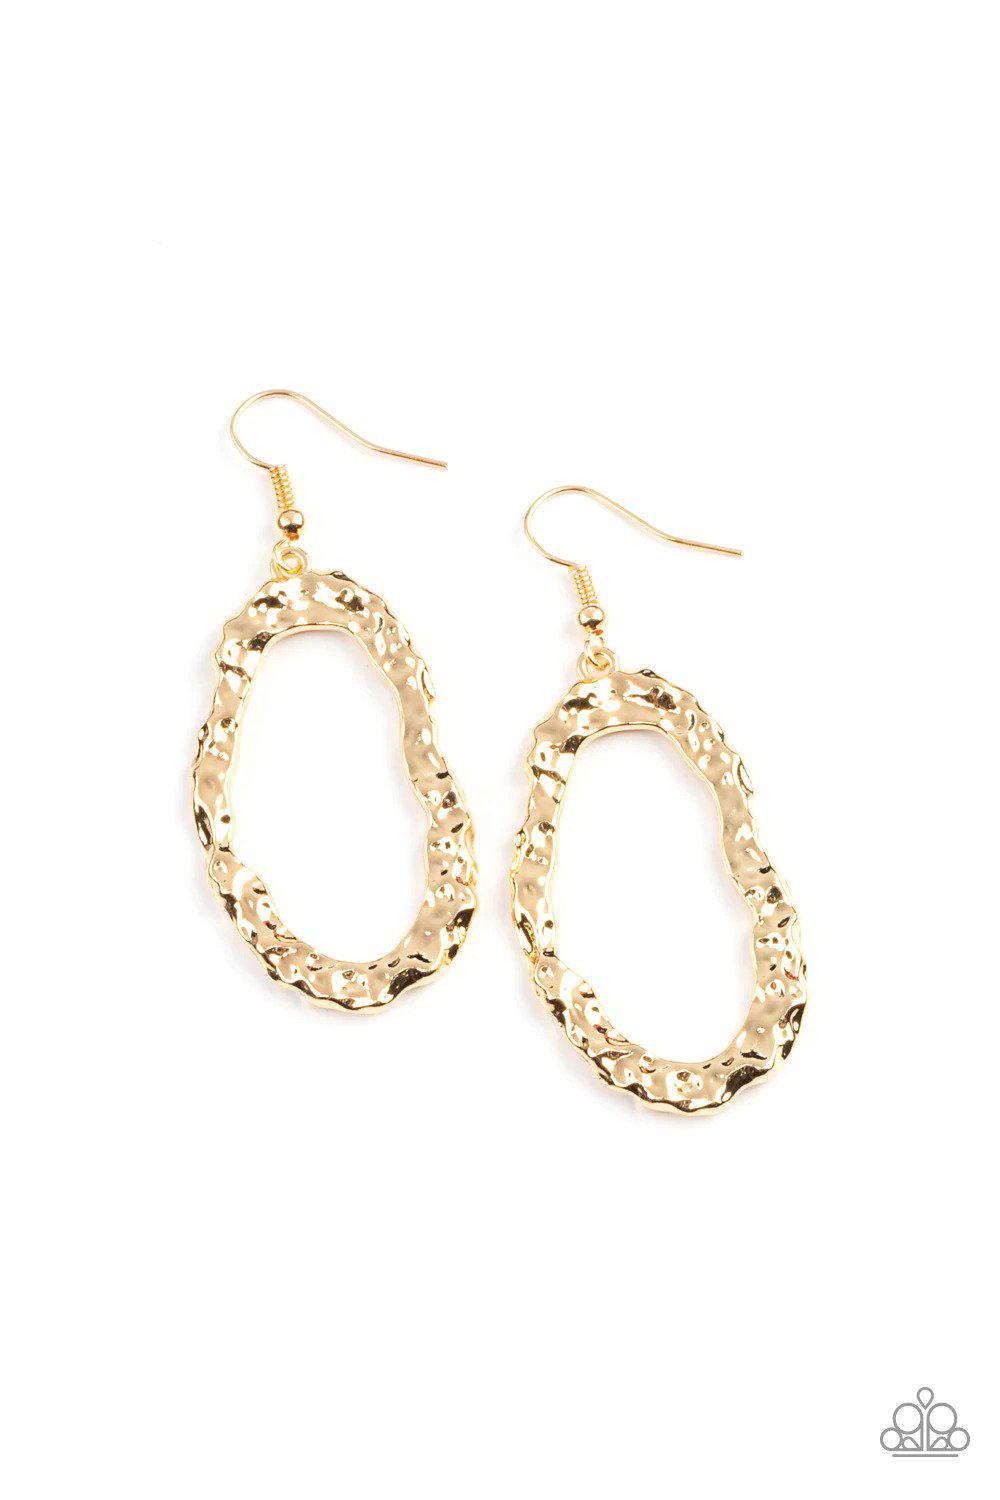 ARTIFACT Checker Gold Earrings - Paparazzi Accessories- lightbox - CarasShop.com - $5 Jewelry by Cara Jewels